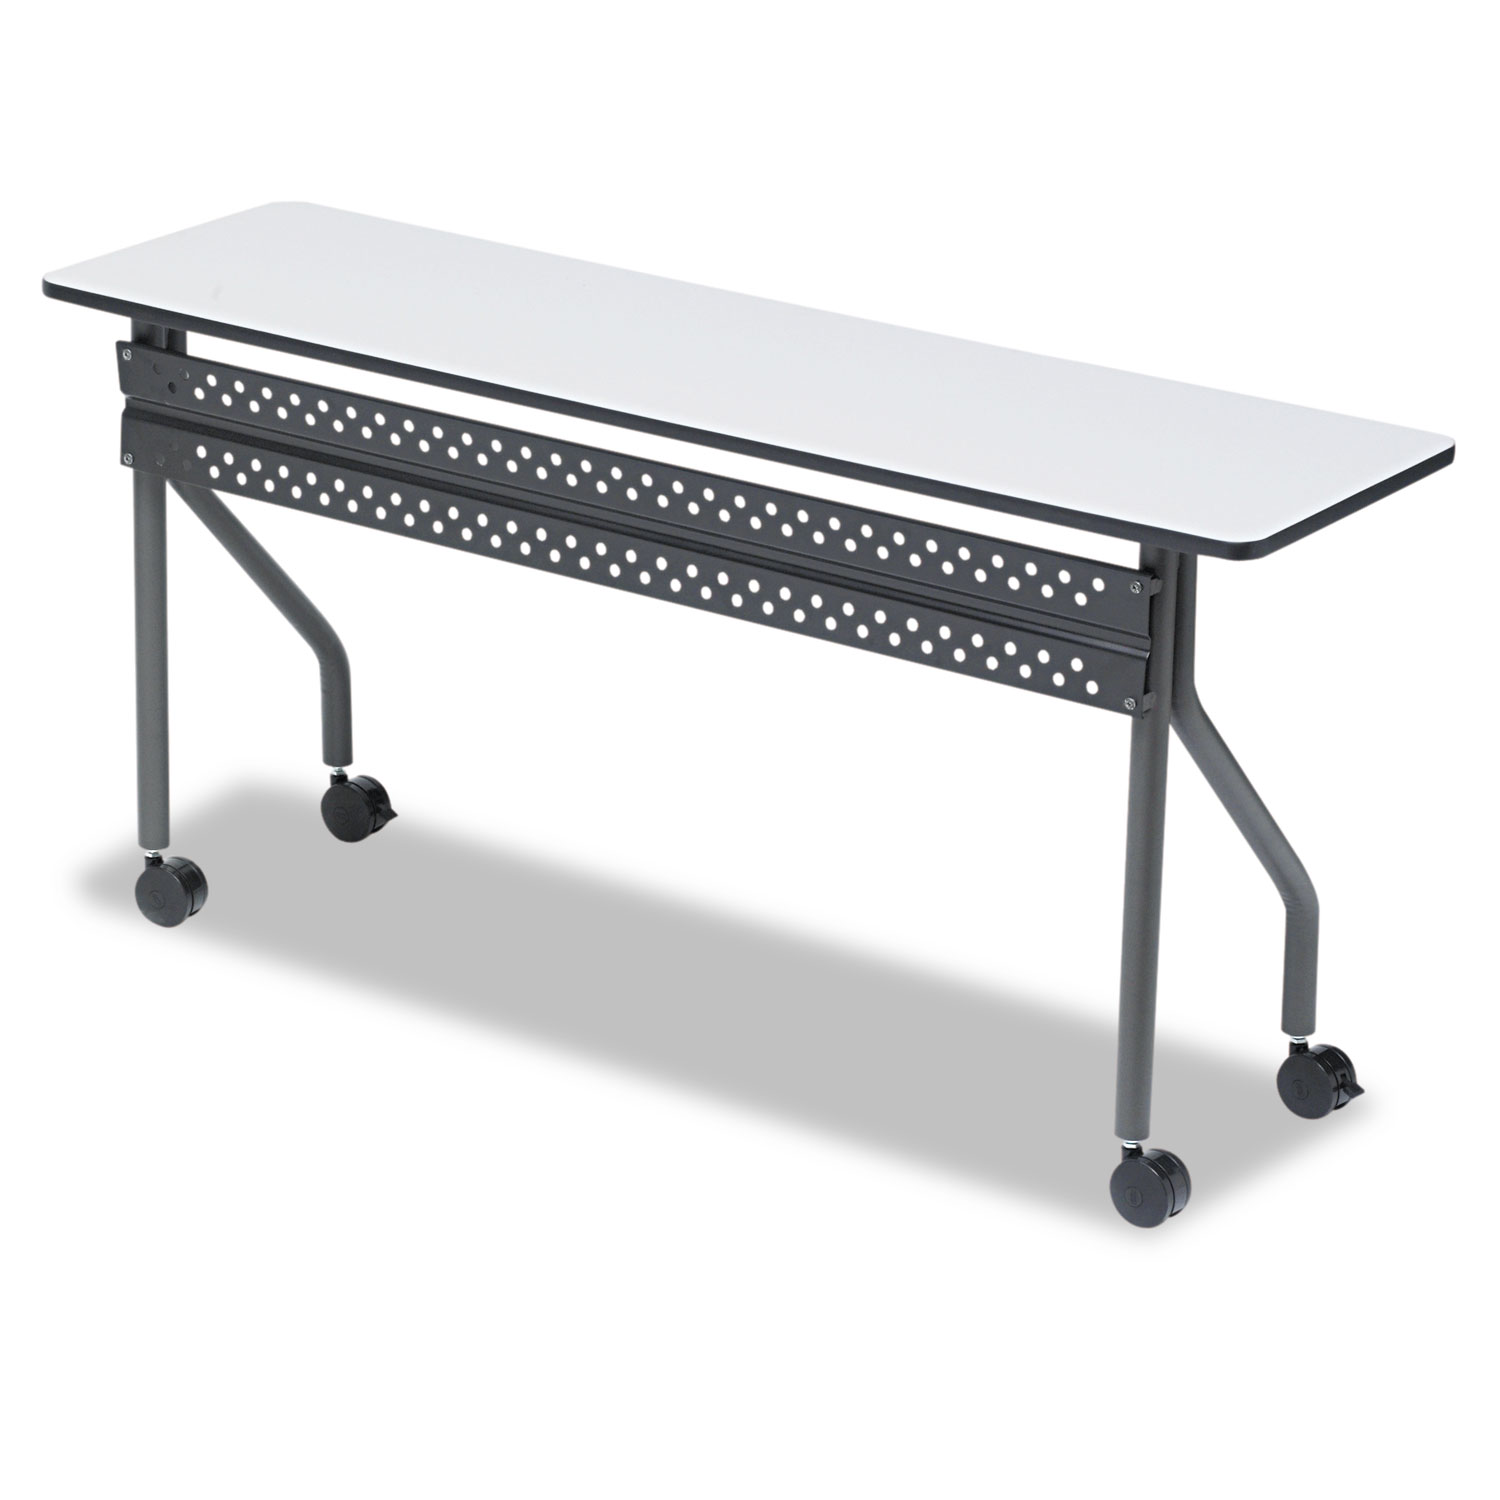  Iceberg 68057 OfficeWorks Mobile Training Table, 60w x 18d x 29h, Gray/Charcoal (ICE68057) 